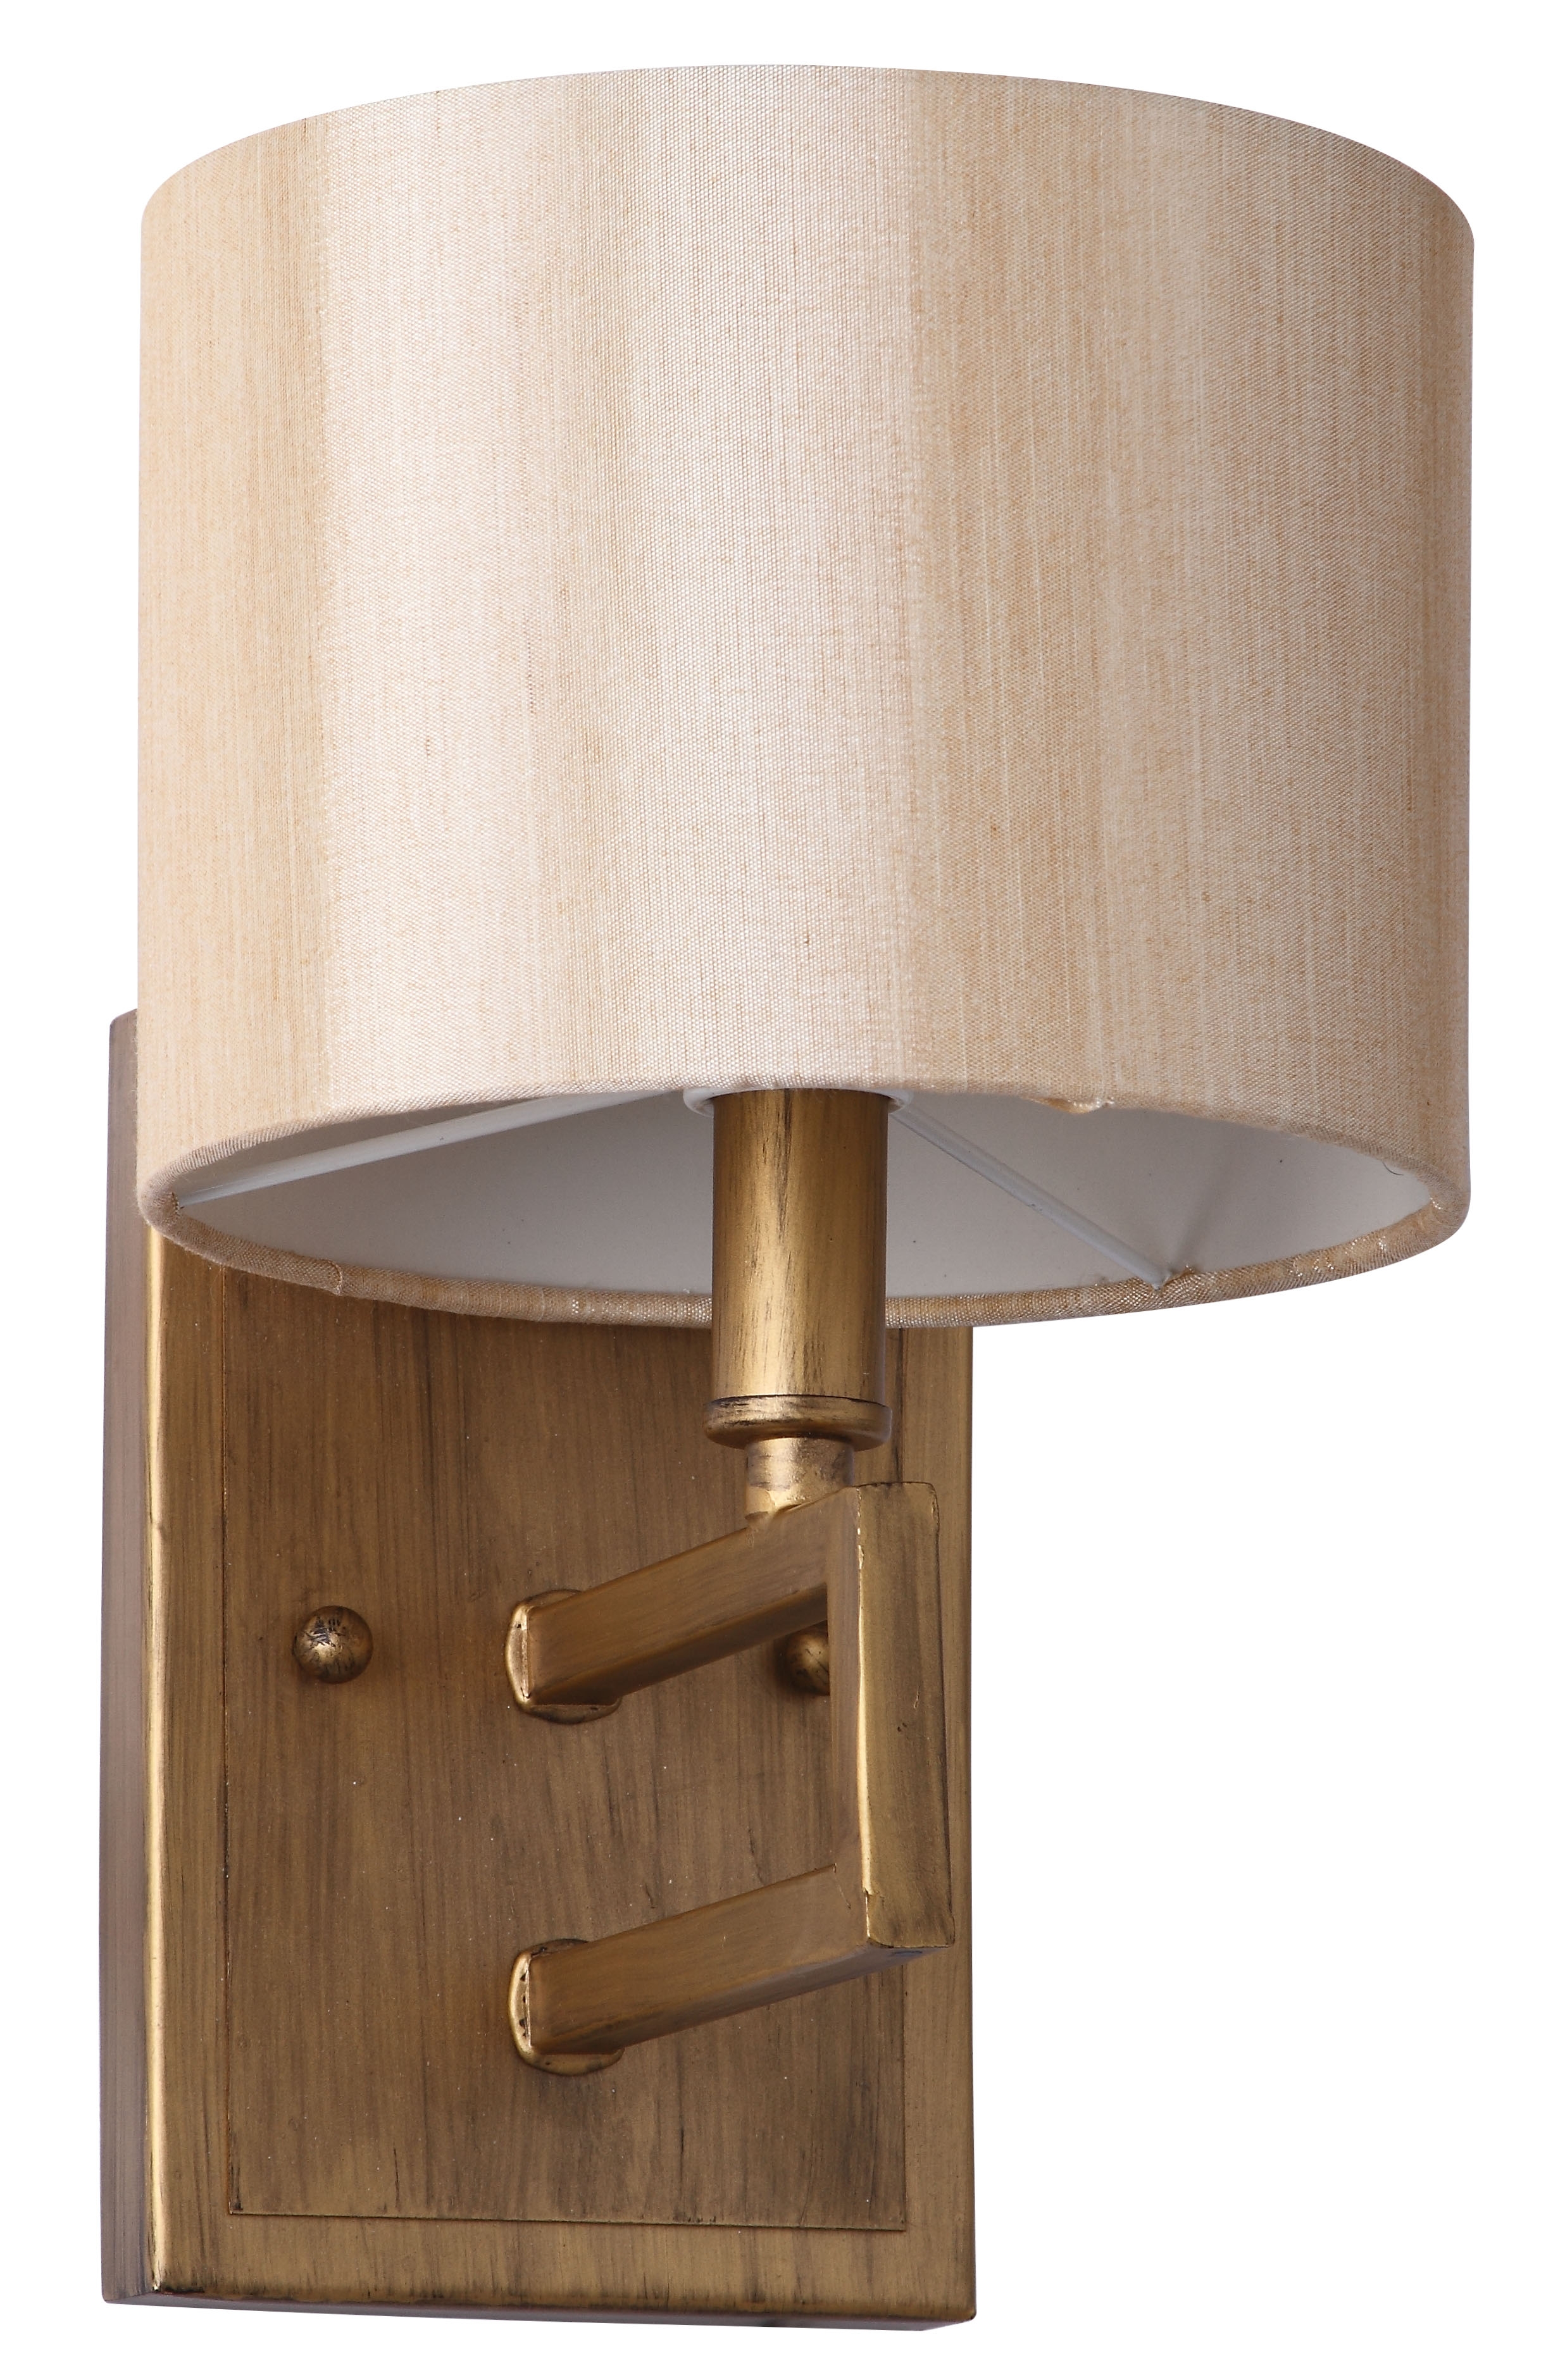 Catena 9.5-Inch H Sconce - Antique Gold - Arlo Home - Image 1